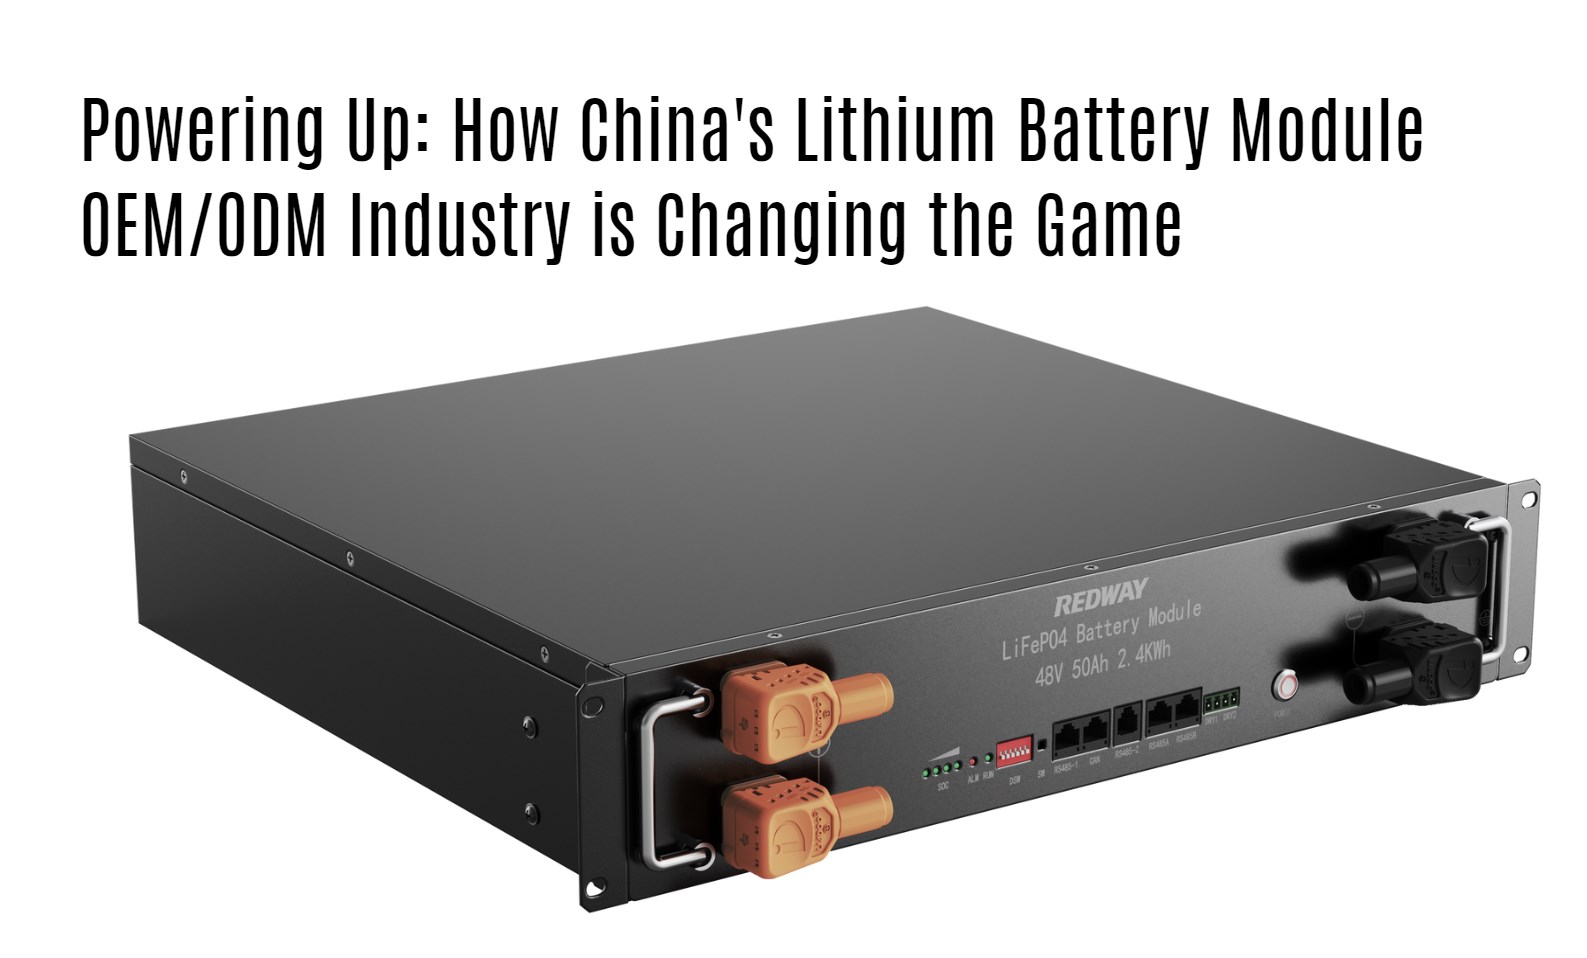 Powering Up: How China's Lithium Battery Module OEM/ODM Industry is Changing the Game. 48v 50ah server rack battery factory oem odm manufacturer